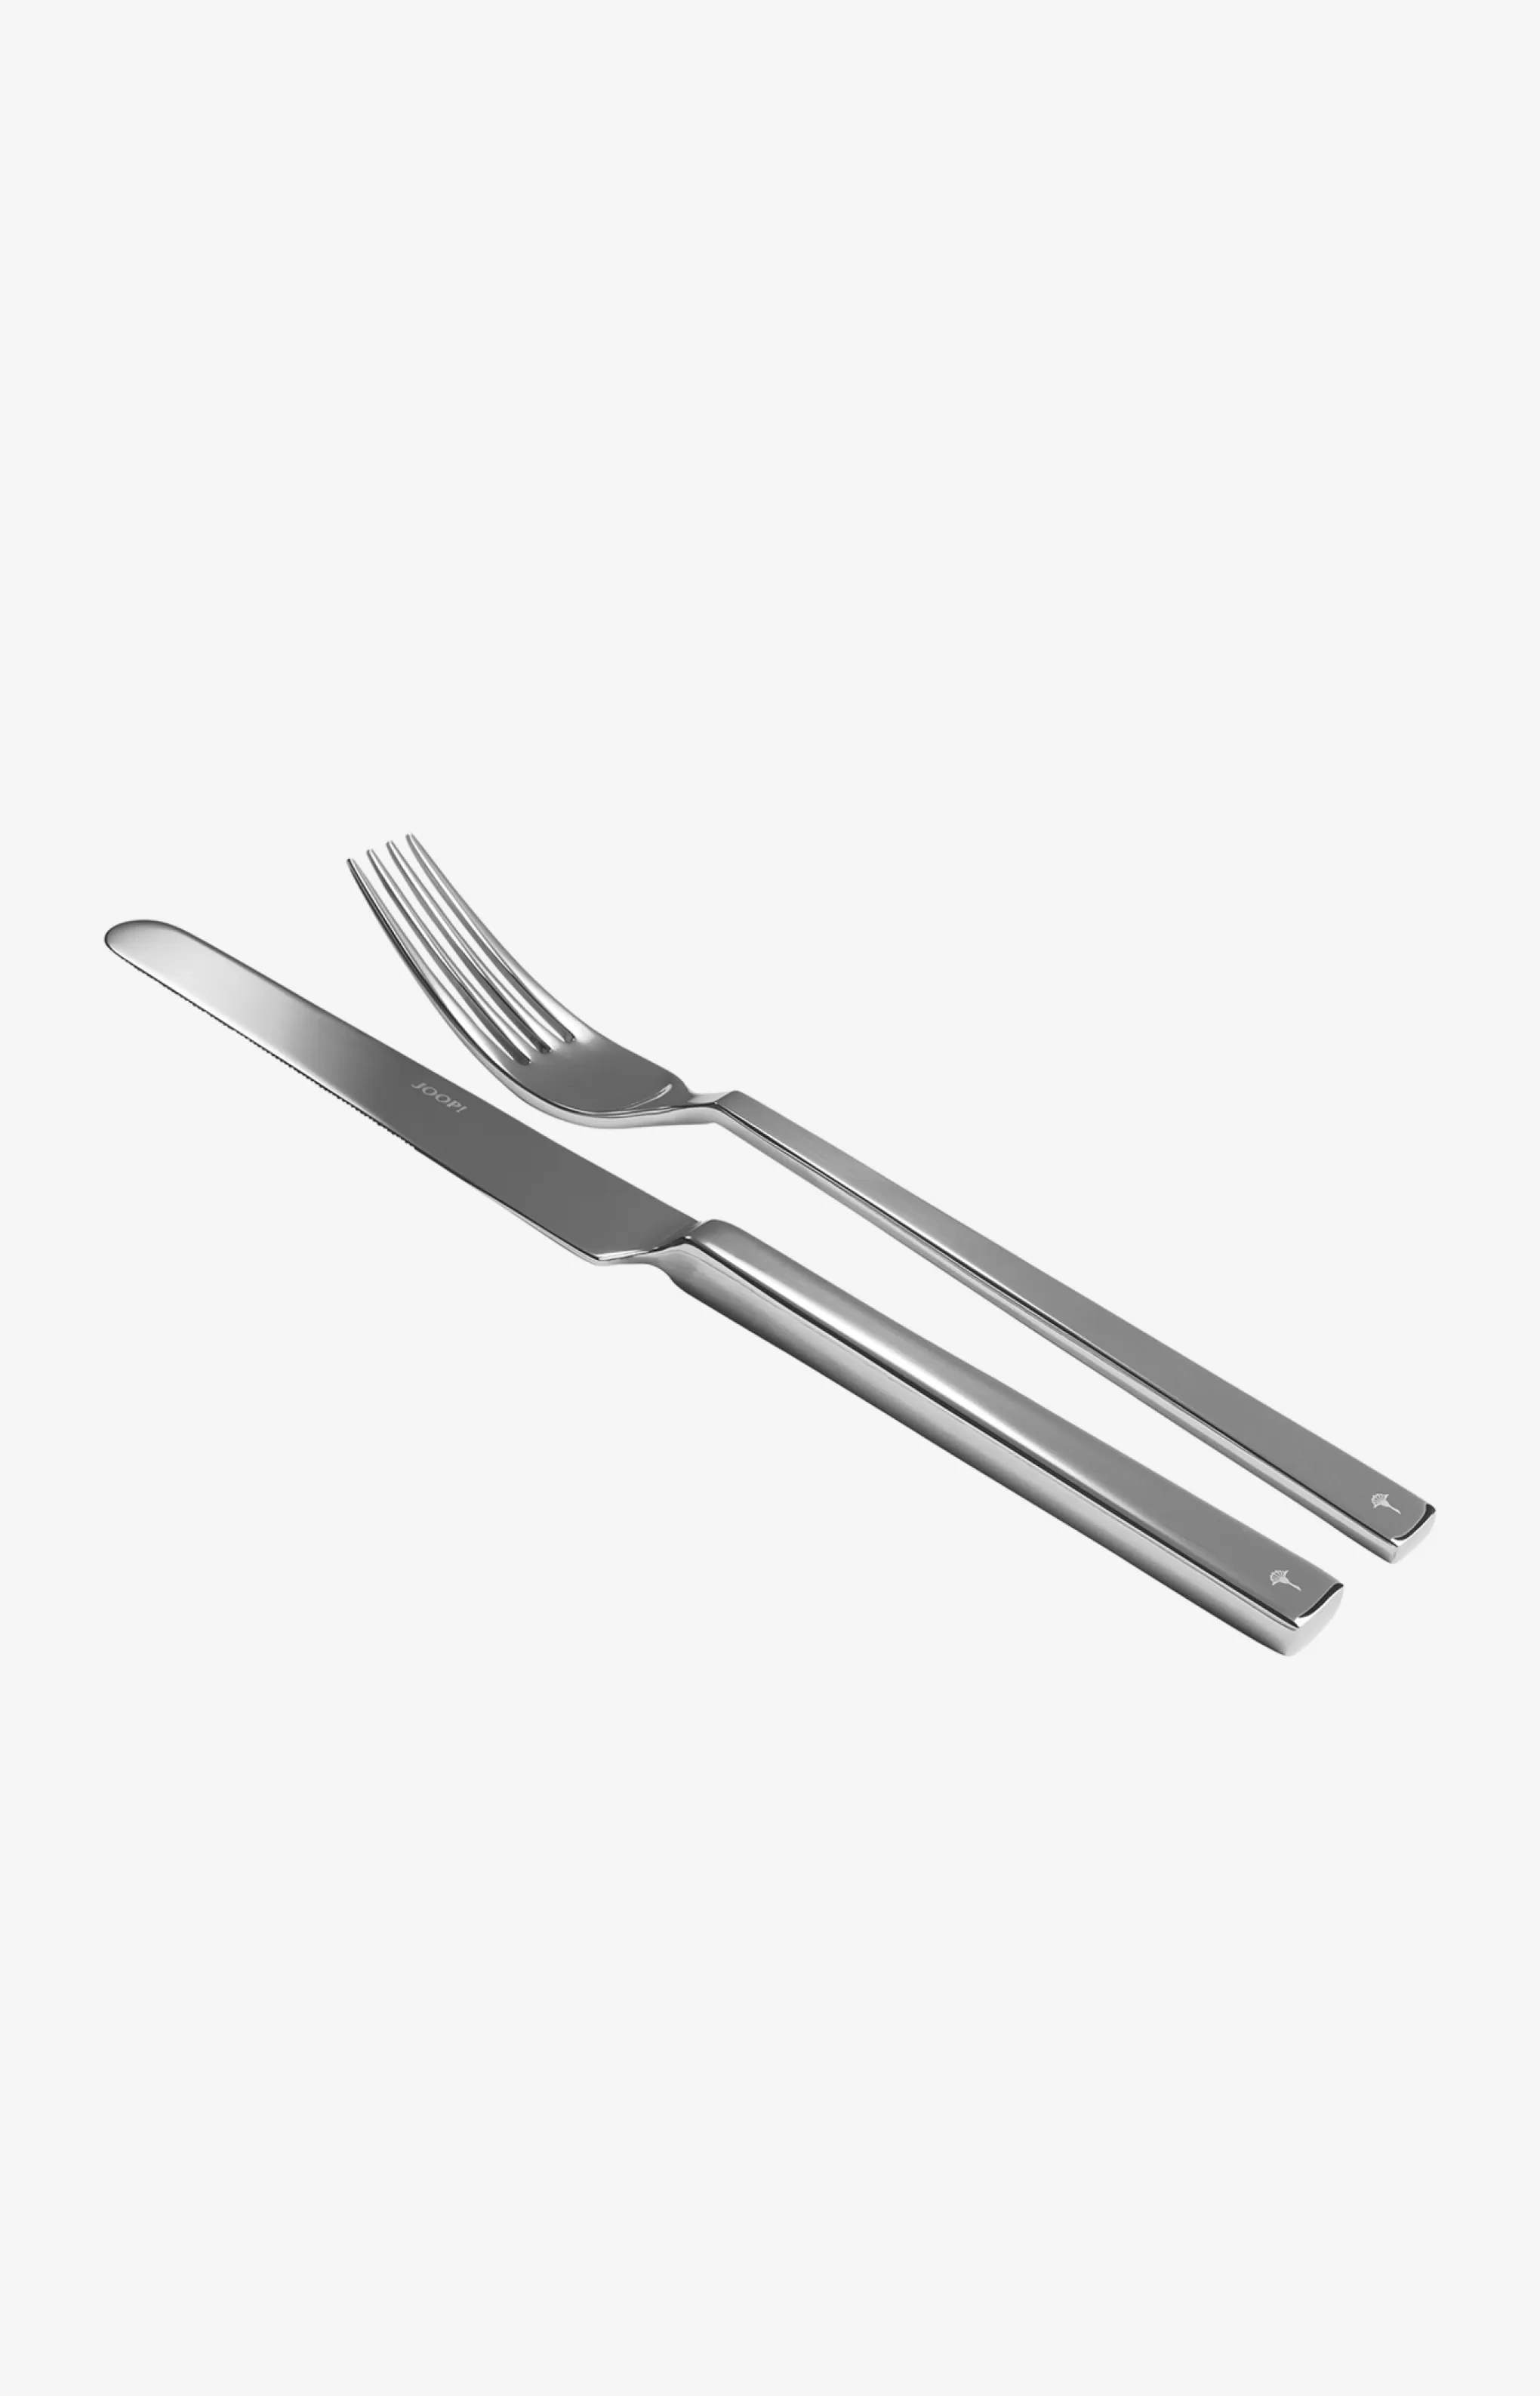 Cutlery | Discover Everything*JOOP Cutlery | Discover Everything Dining Glamour Cutlery Set - 30 pcs. with shiny finish